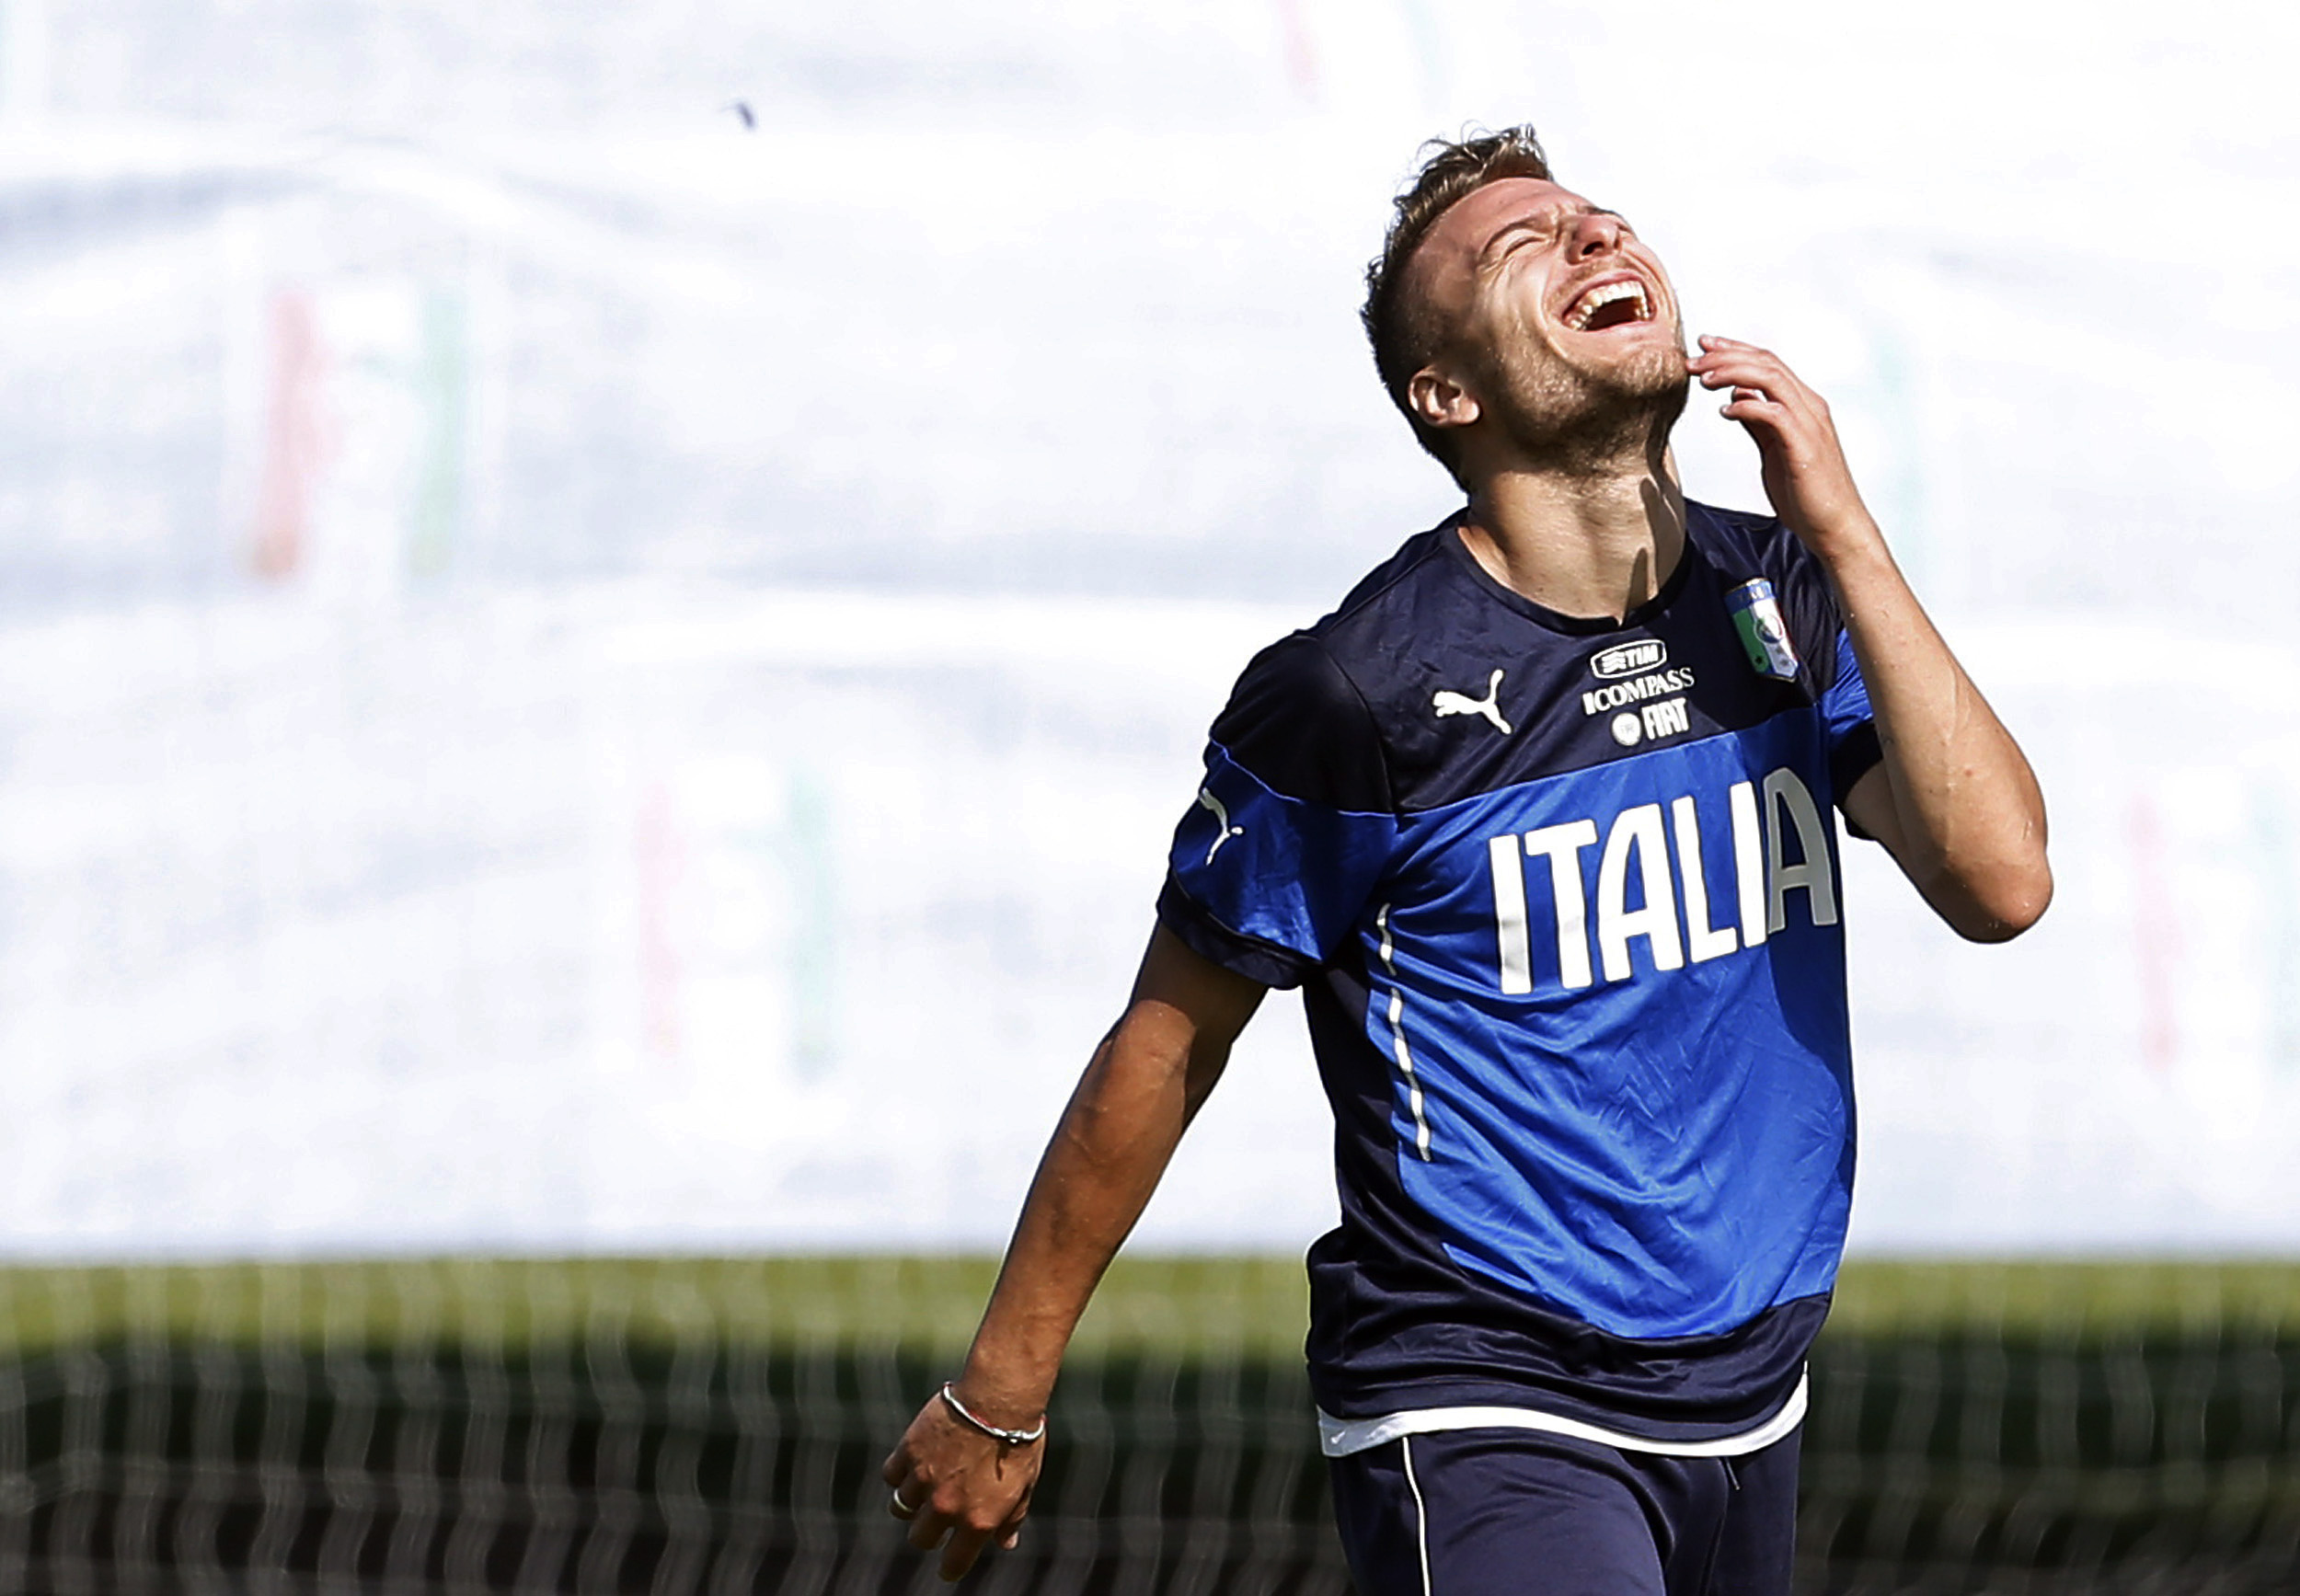 Italy's national soccer player Ciro Immobile laughs during a training session at the Portobello training center in Mangaratiba June 16, 2014. Italy will face Costa Rica during their  2014 World Cup Group D soccer match on June 20.  REUTERS/Alessandro Garo